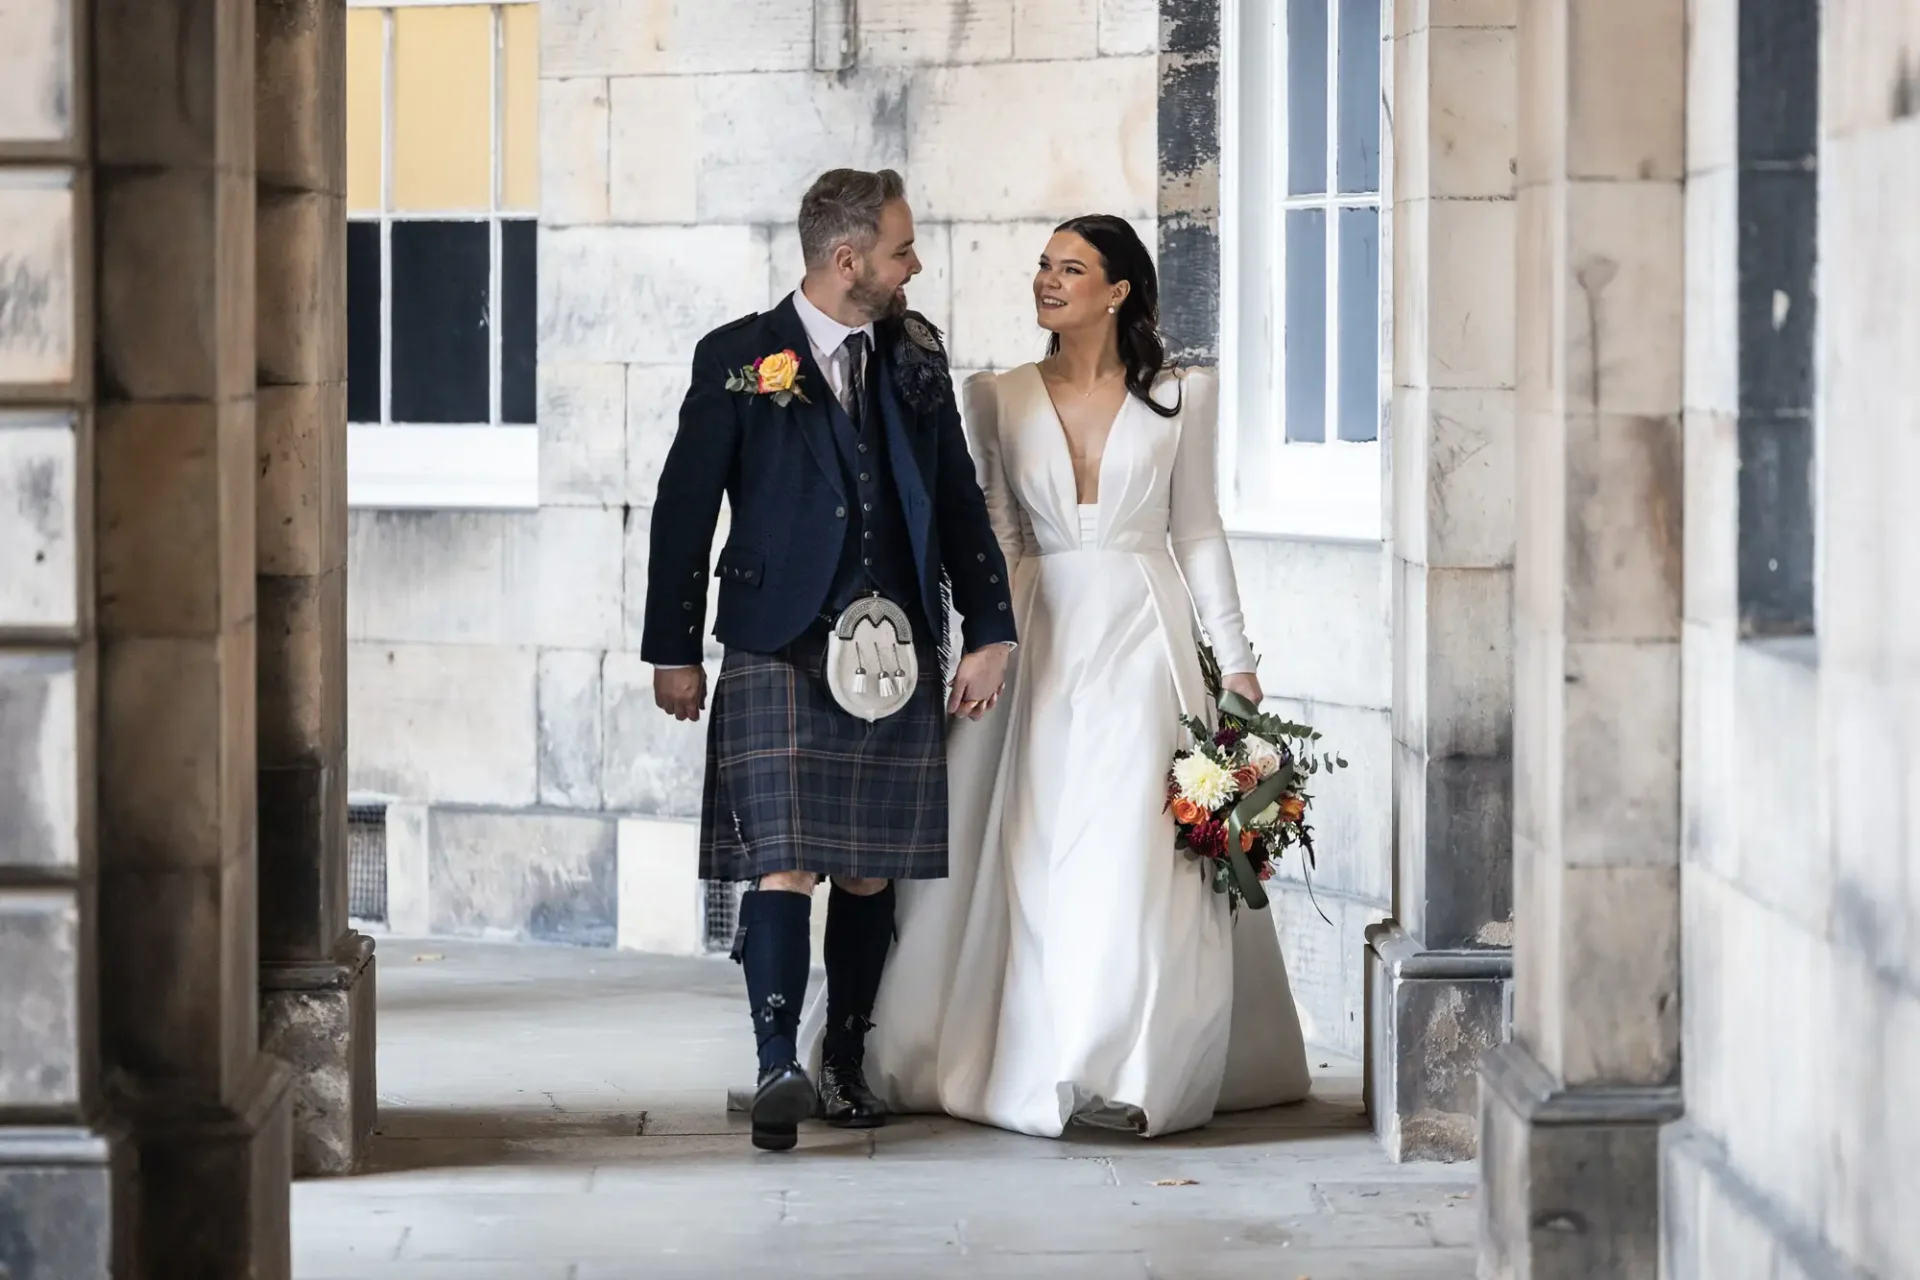 A bride in a white dress and a groom in a kilt exchange smiles while walking hand in hand in a stone corridor.